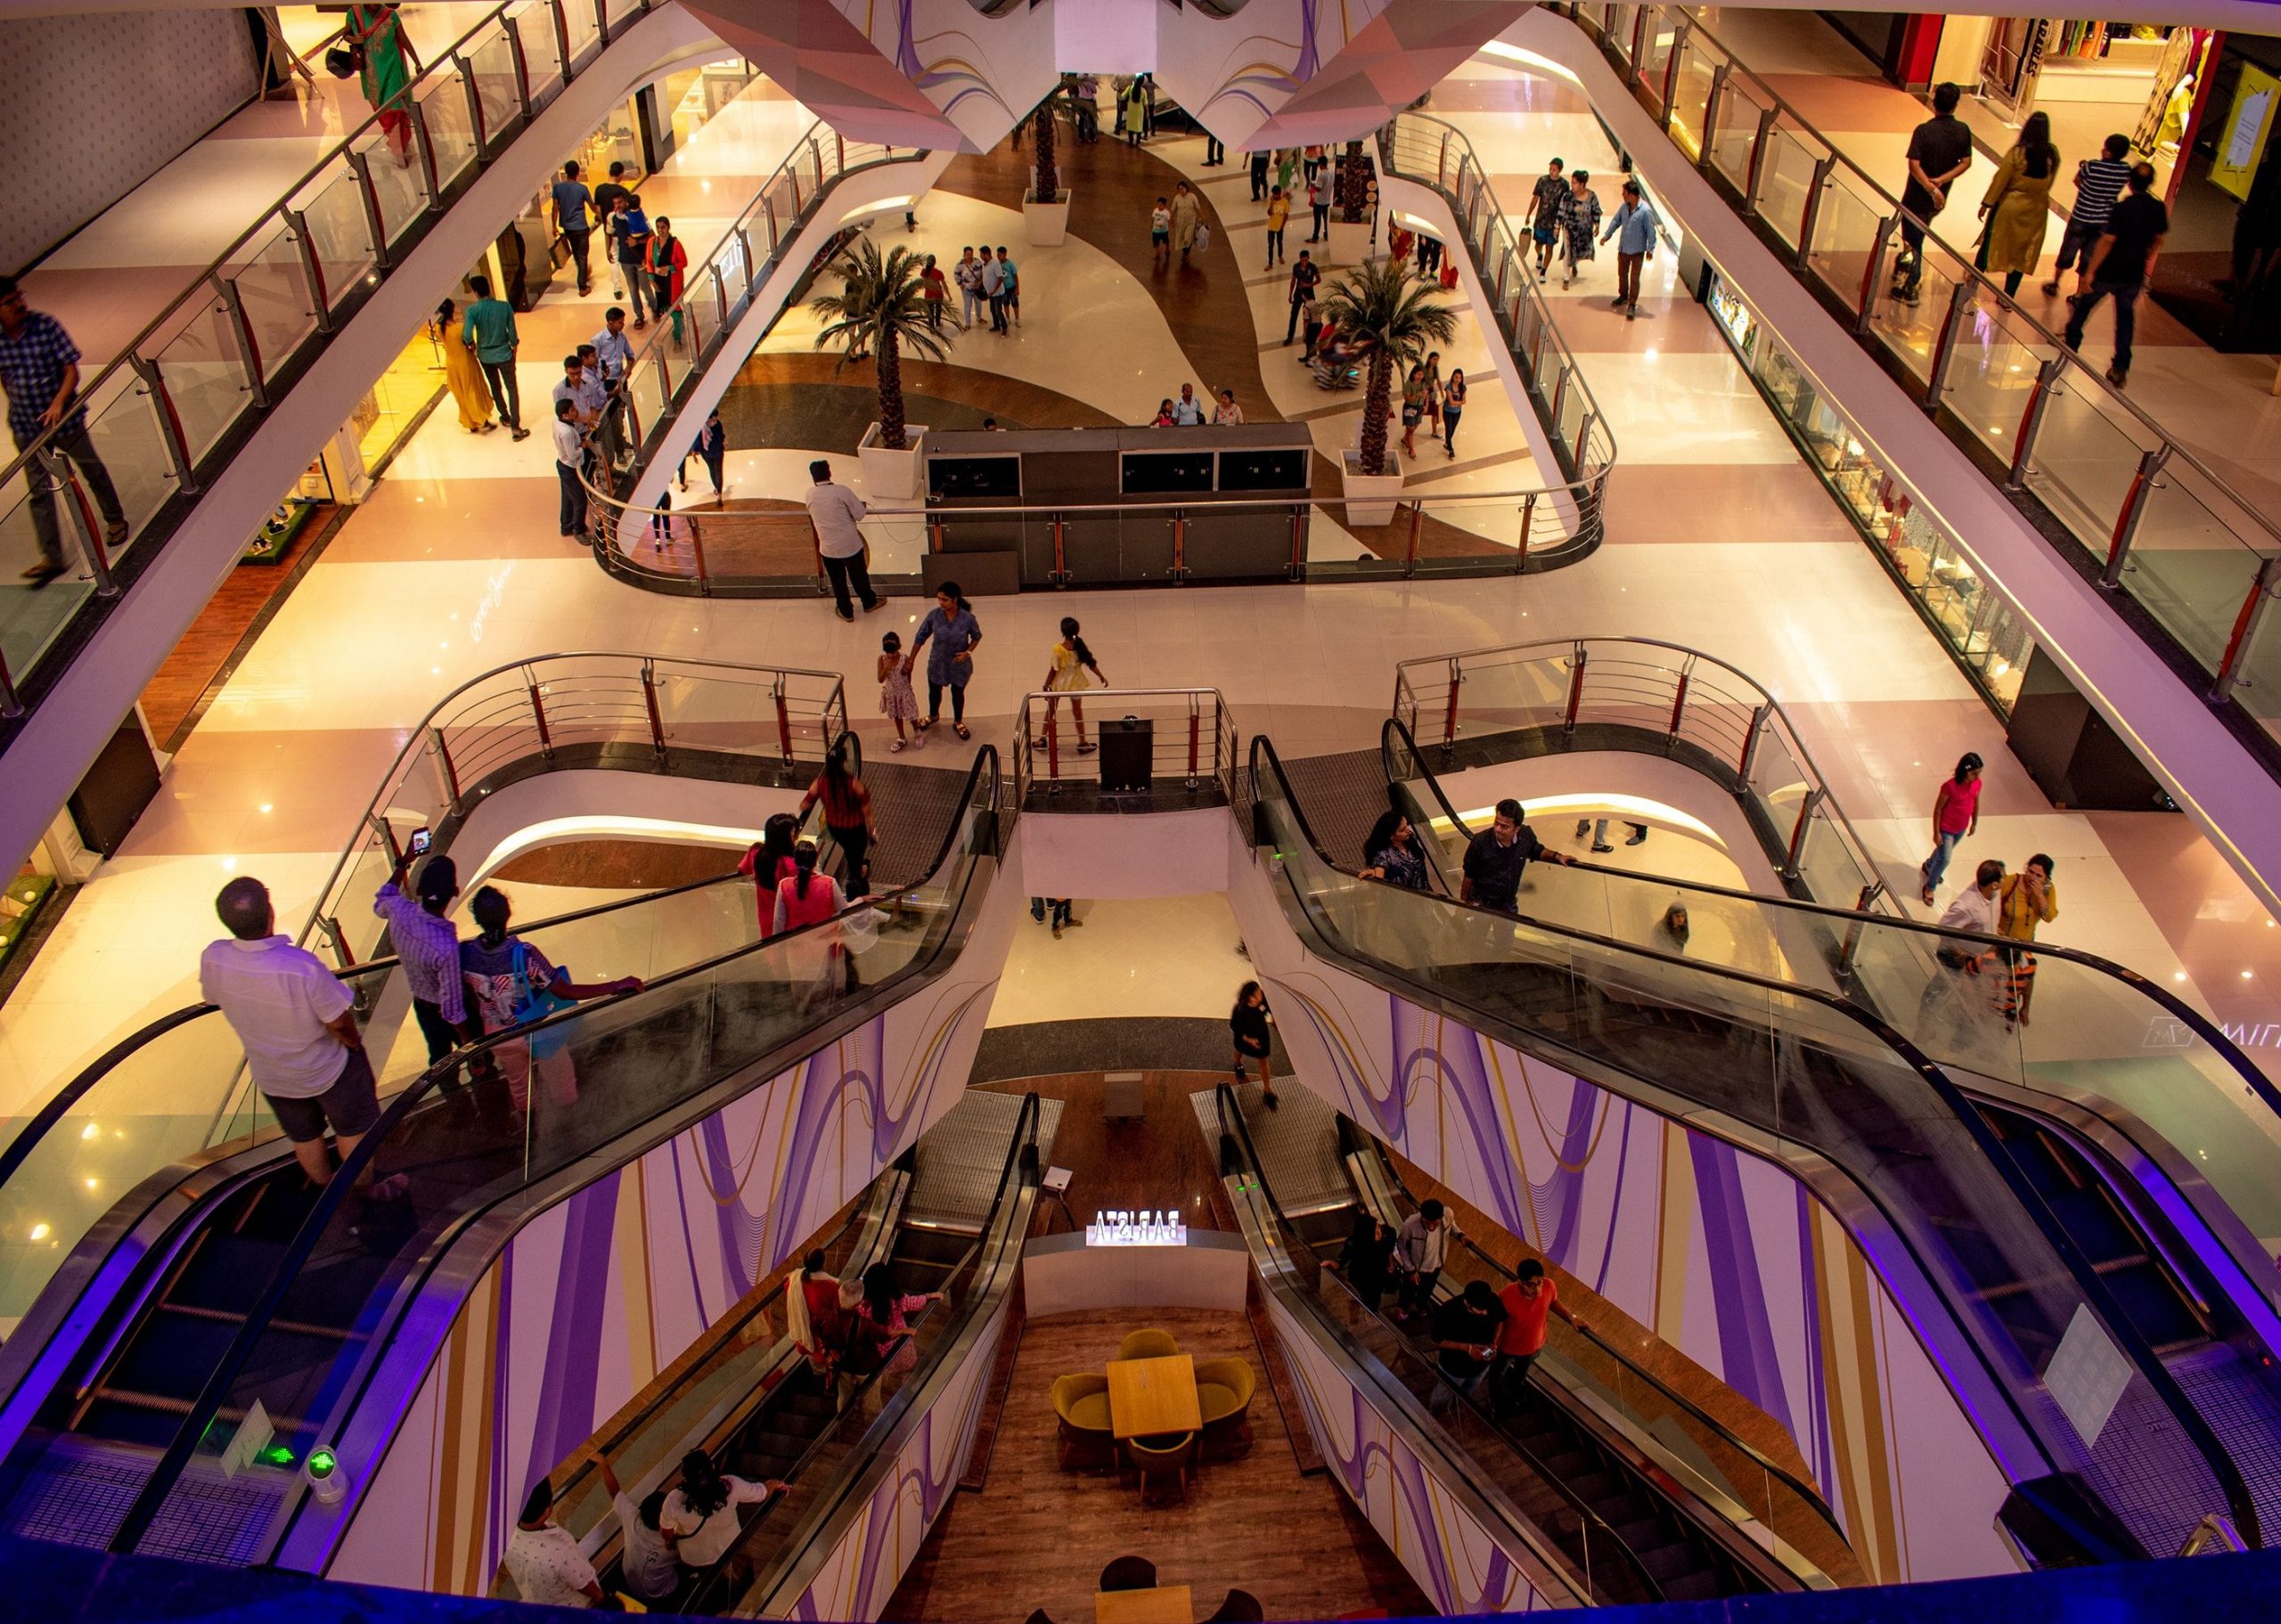 Indias ghost malls: All you need to know